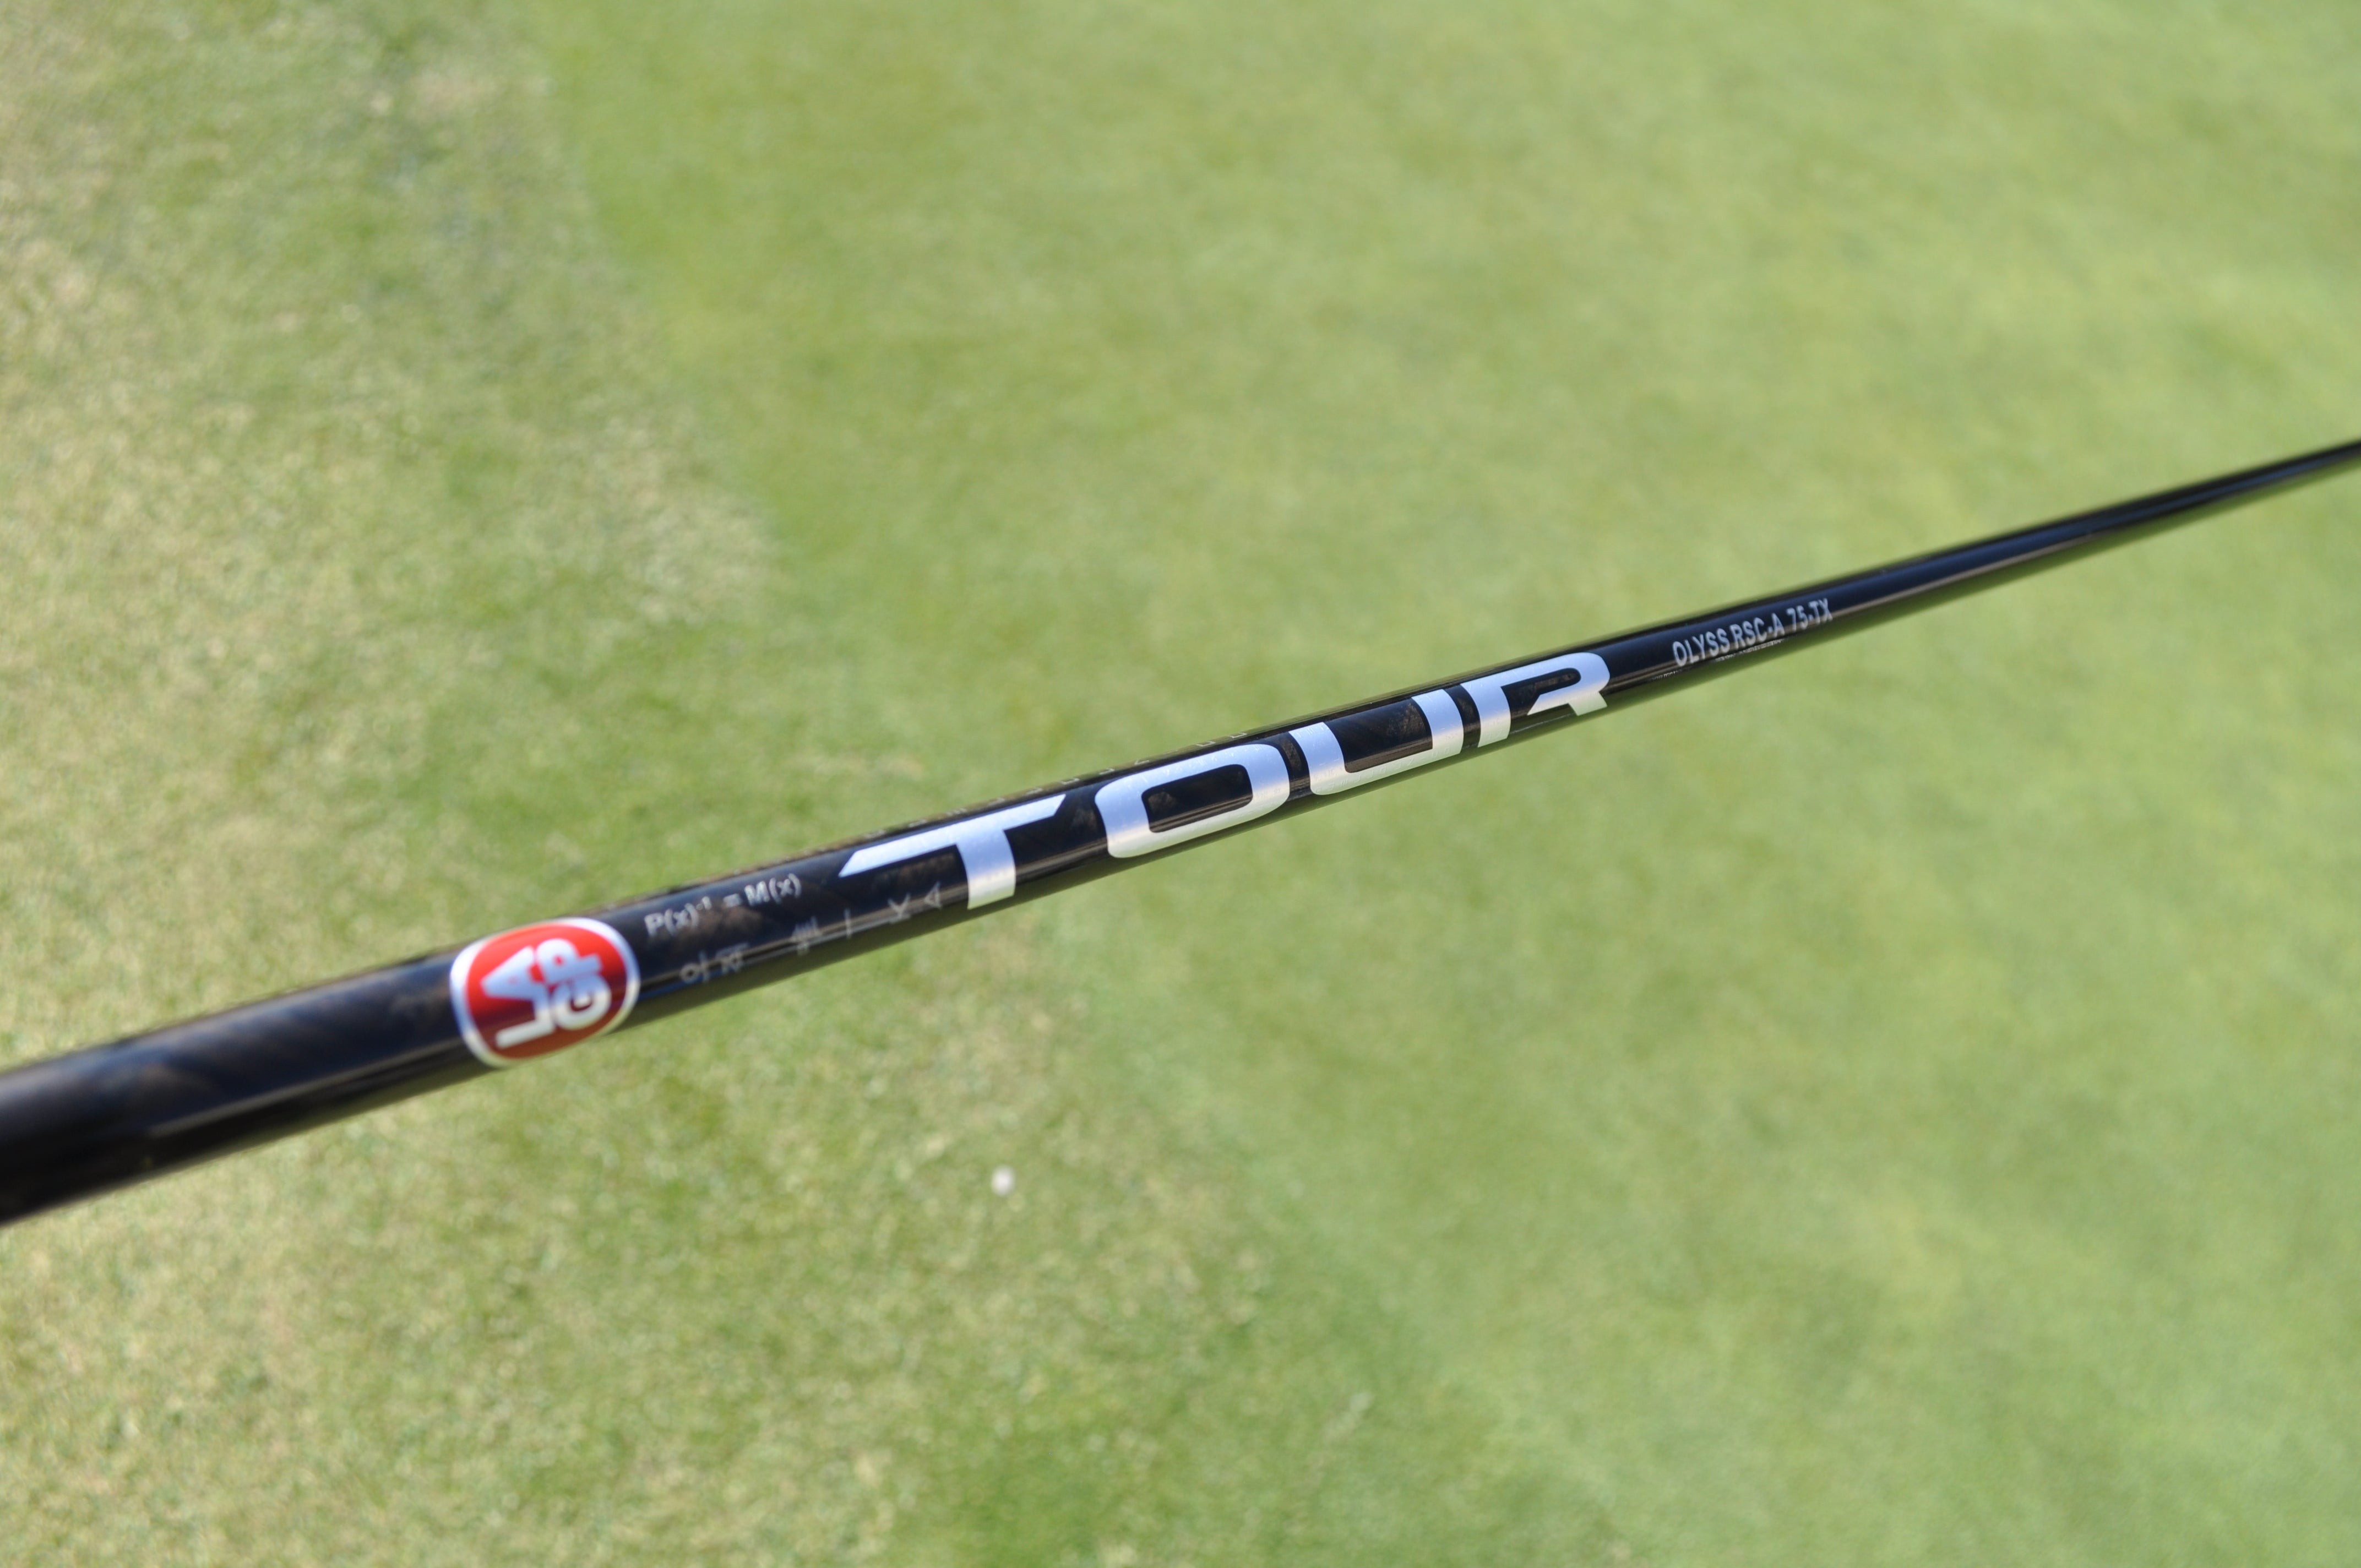 LA Golf's new OLYSS prototype driver shaft offers a low-mid ball flight with low spin.